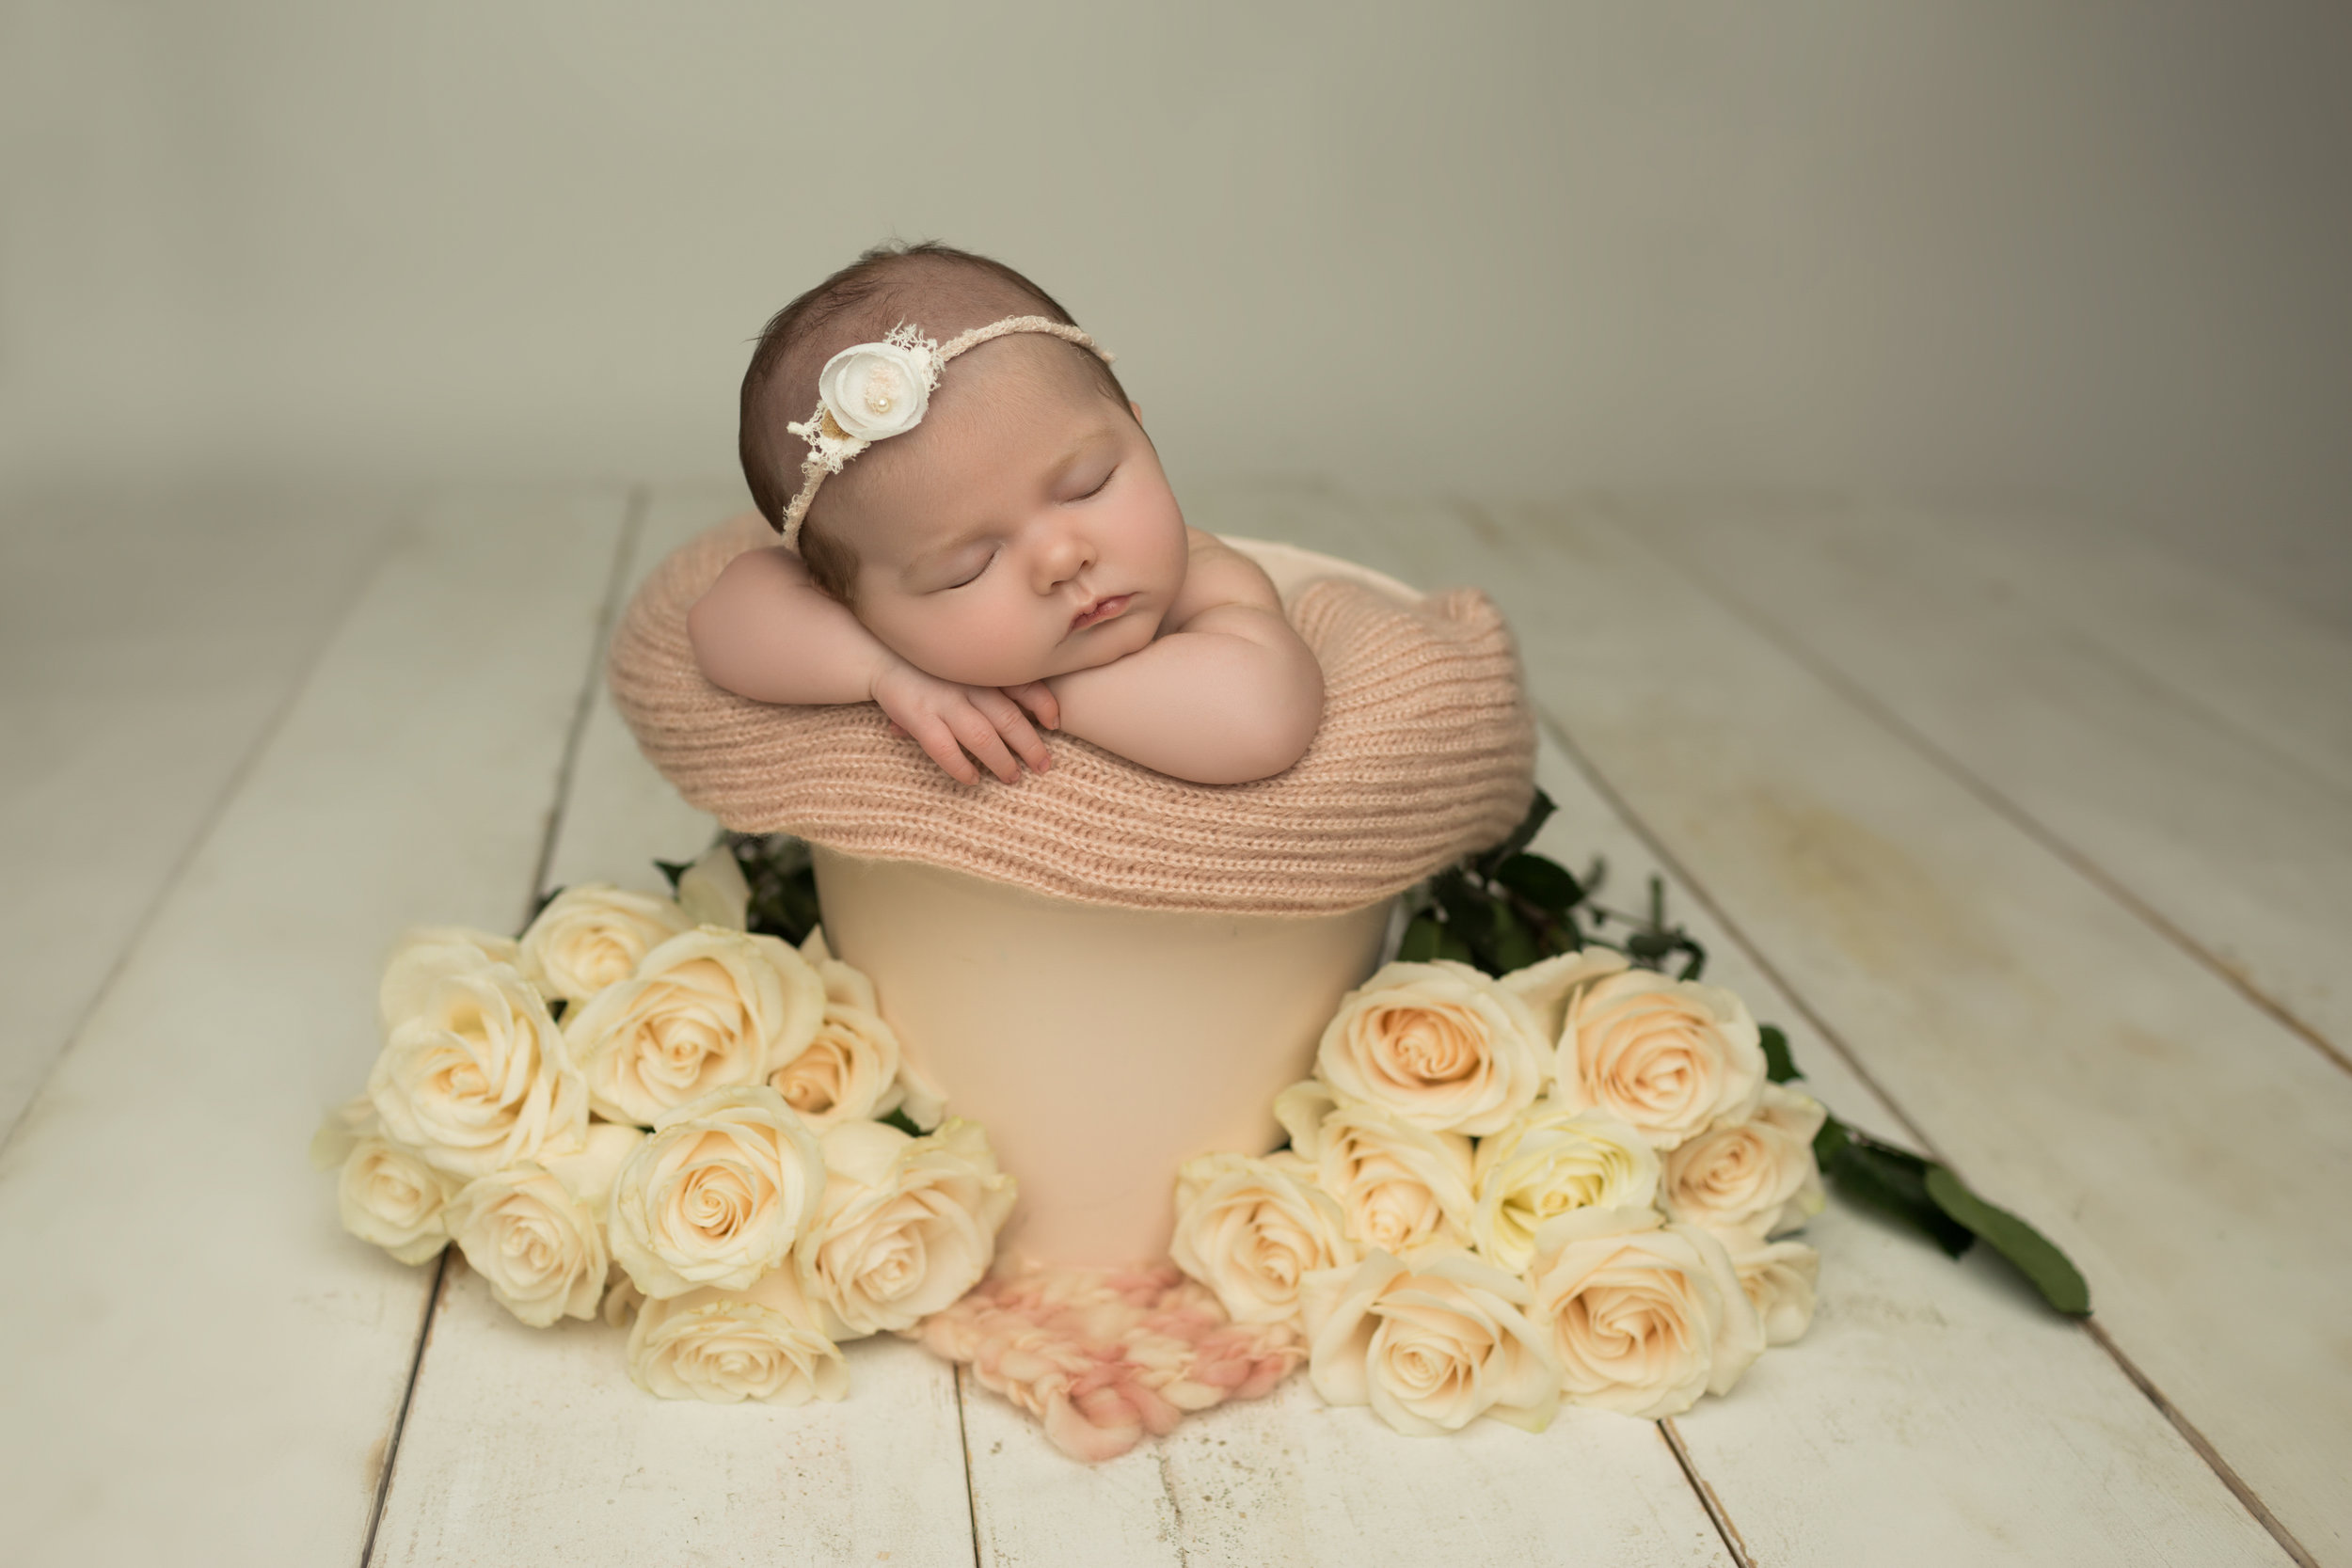 Baby girl in pink bucket surrounded by roses